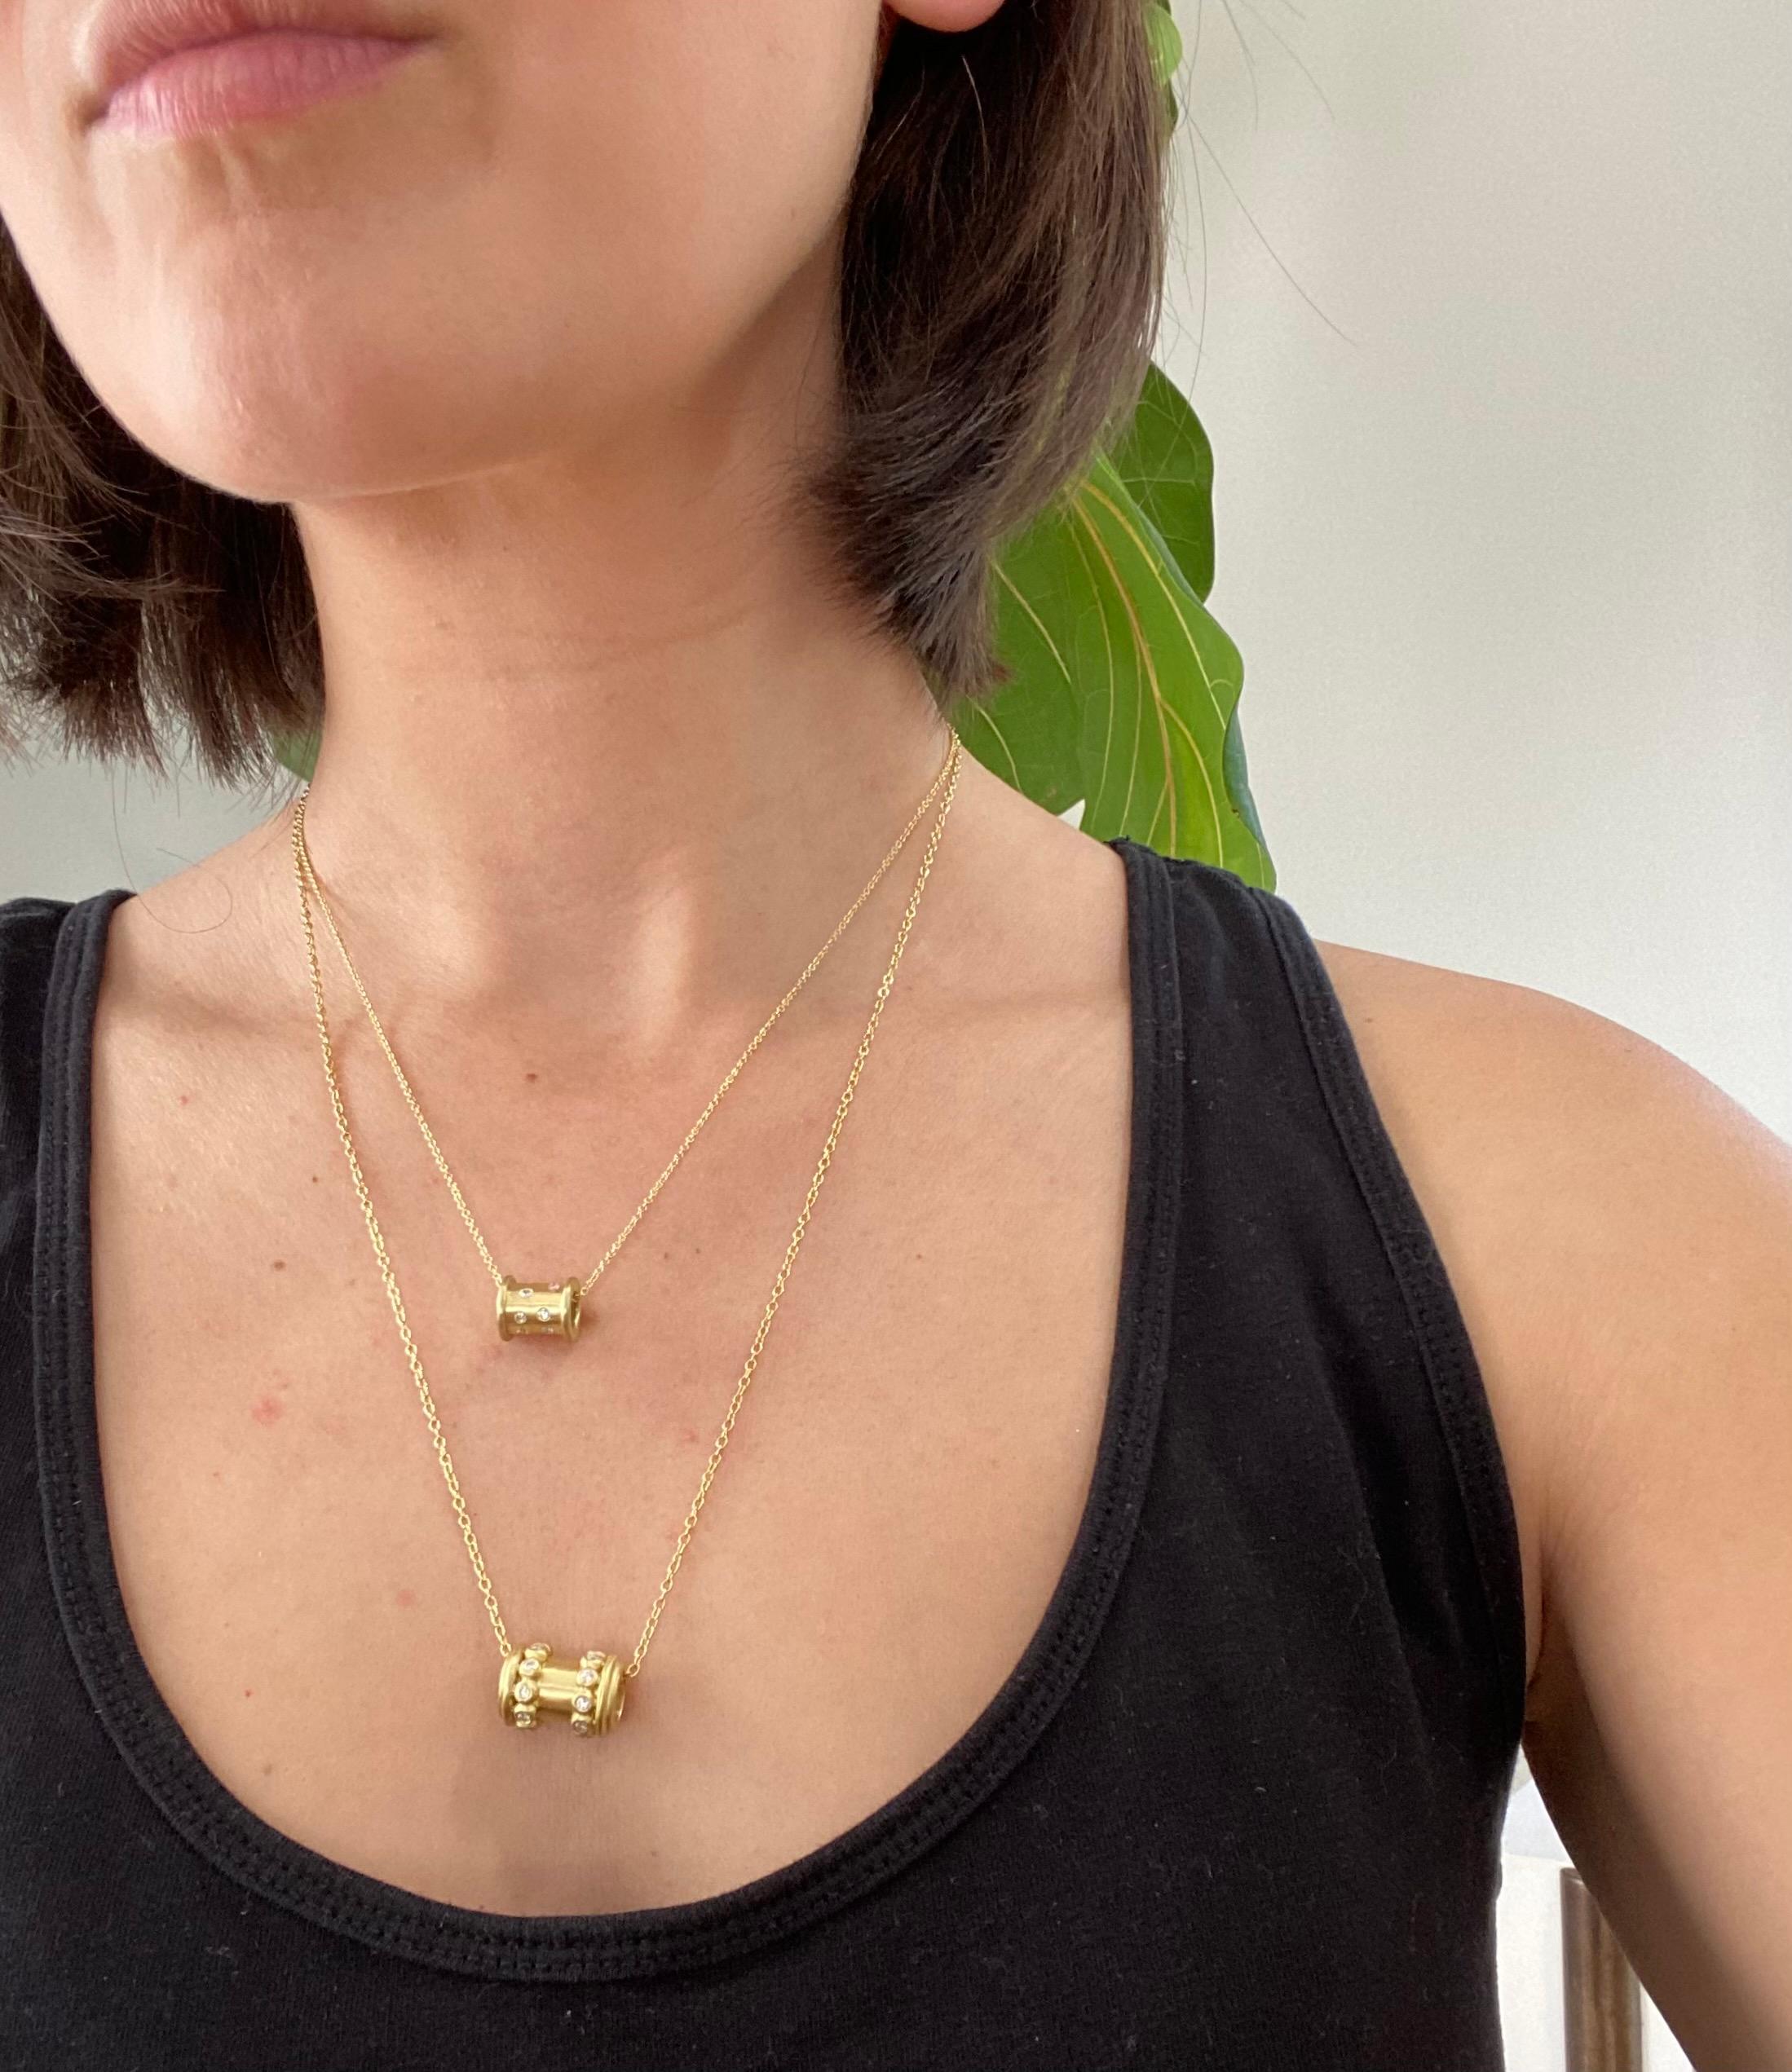 Handmade in 18 Karat Gold and studded with white diamonds Faye Kim's modern spool necklace design is a great addition to any jewelry collection. Worn alone or layered with other necklaces, the look is timeless and fitting for every day.

Cable chain